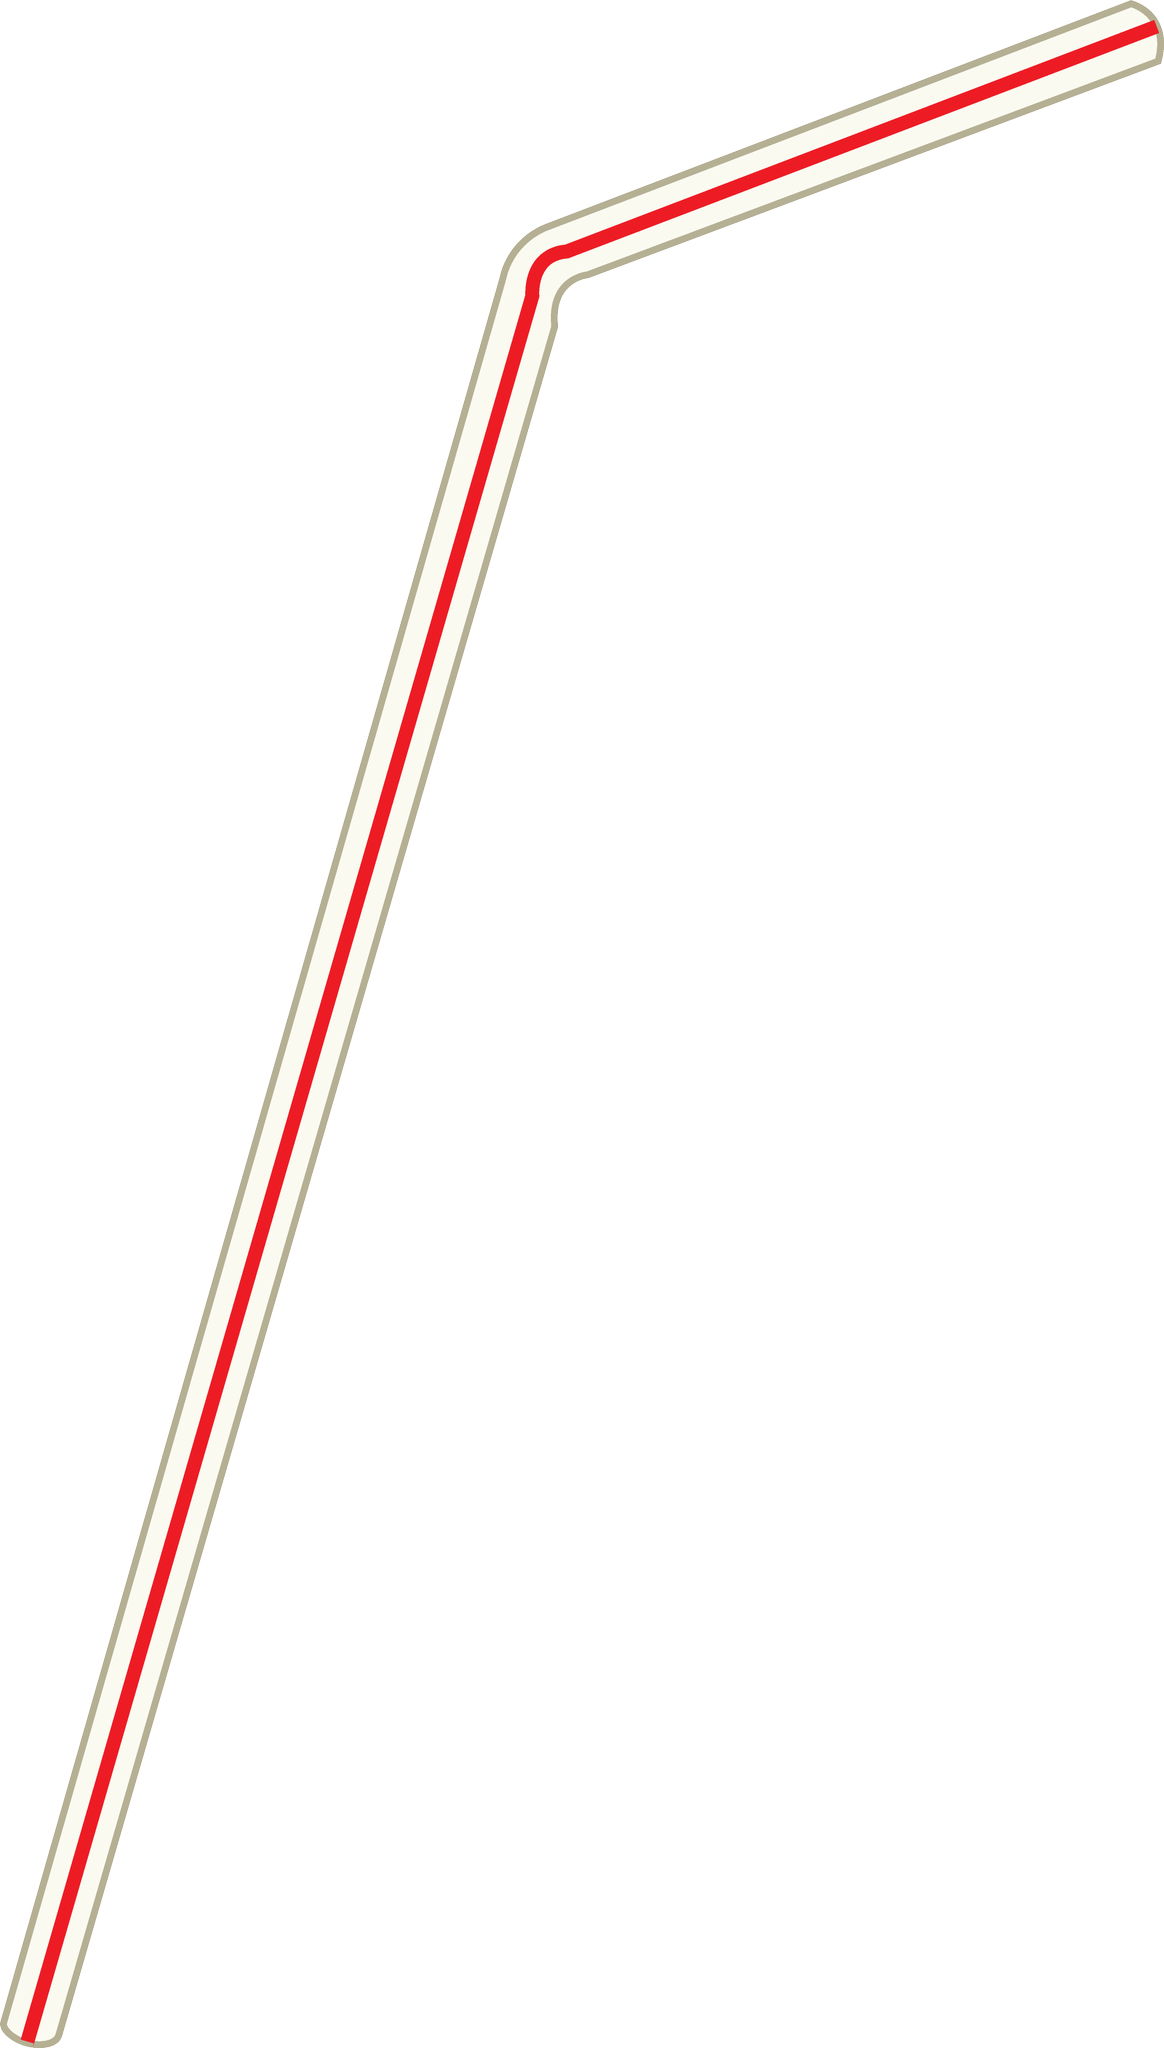 Cold Drink Straw PNG Free Download